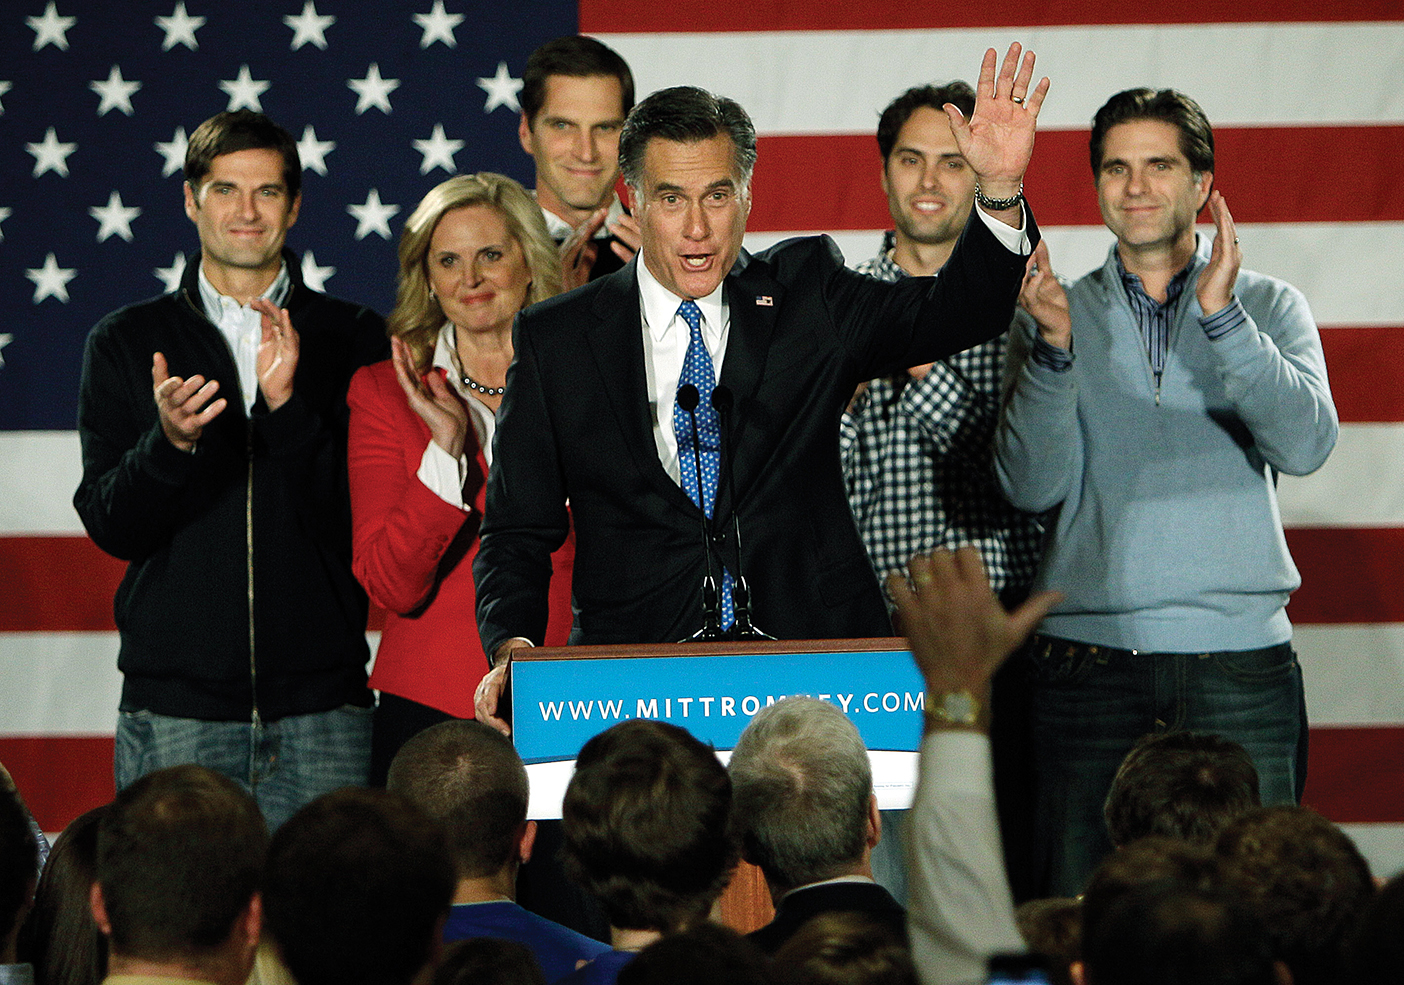 Romney waves to a crowd as his family stands behind him during his presidential campaign.